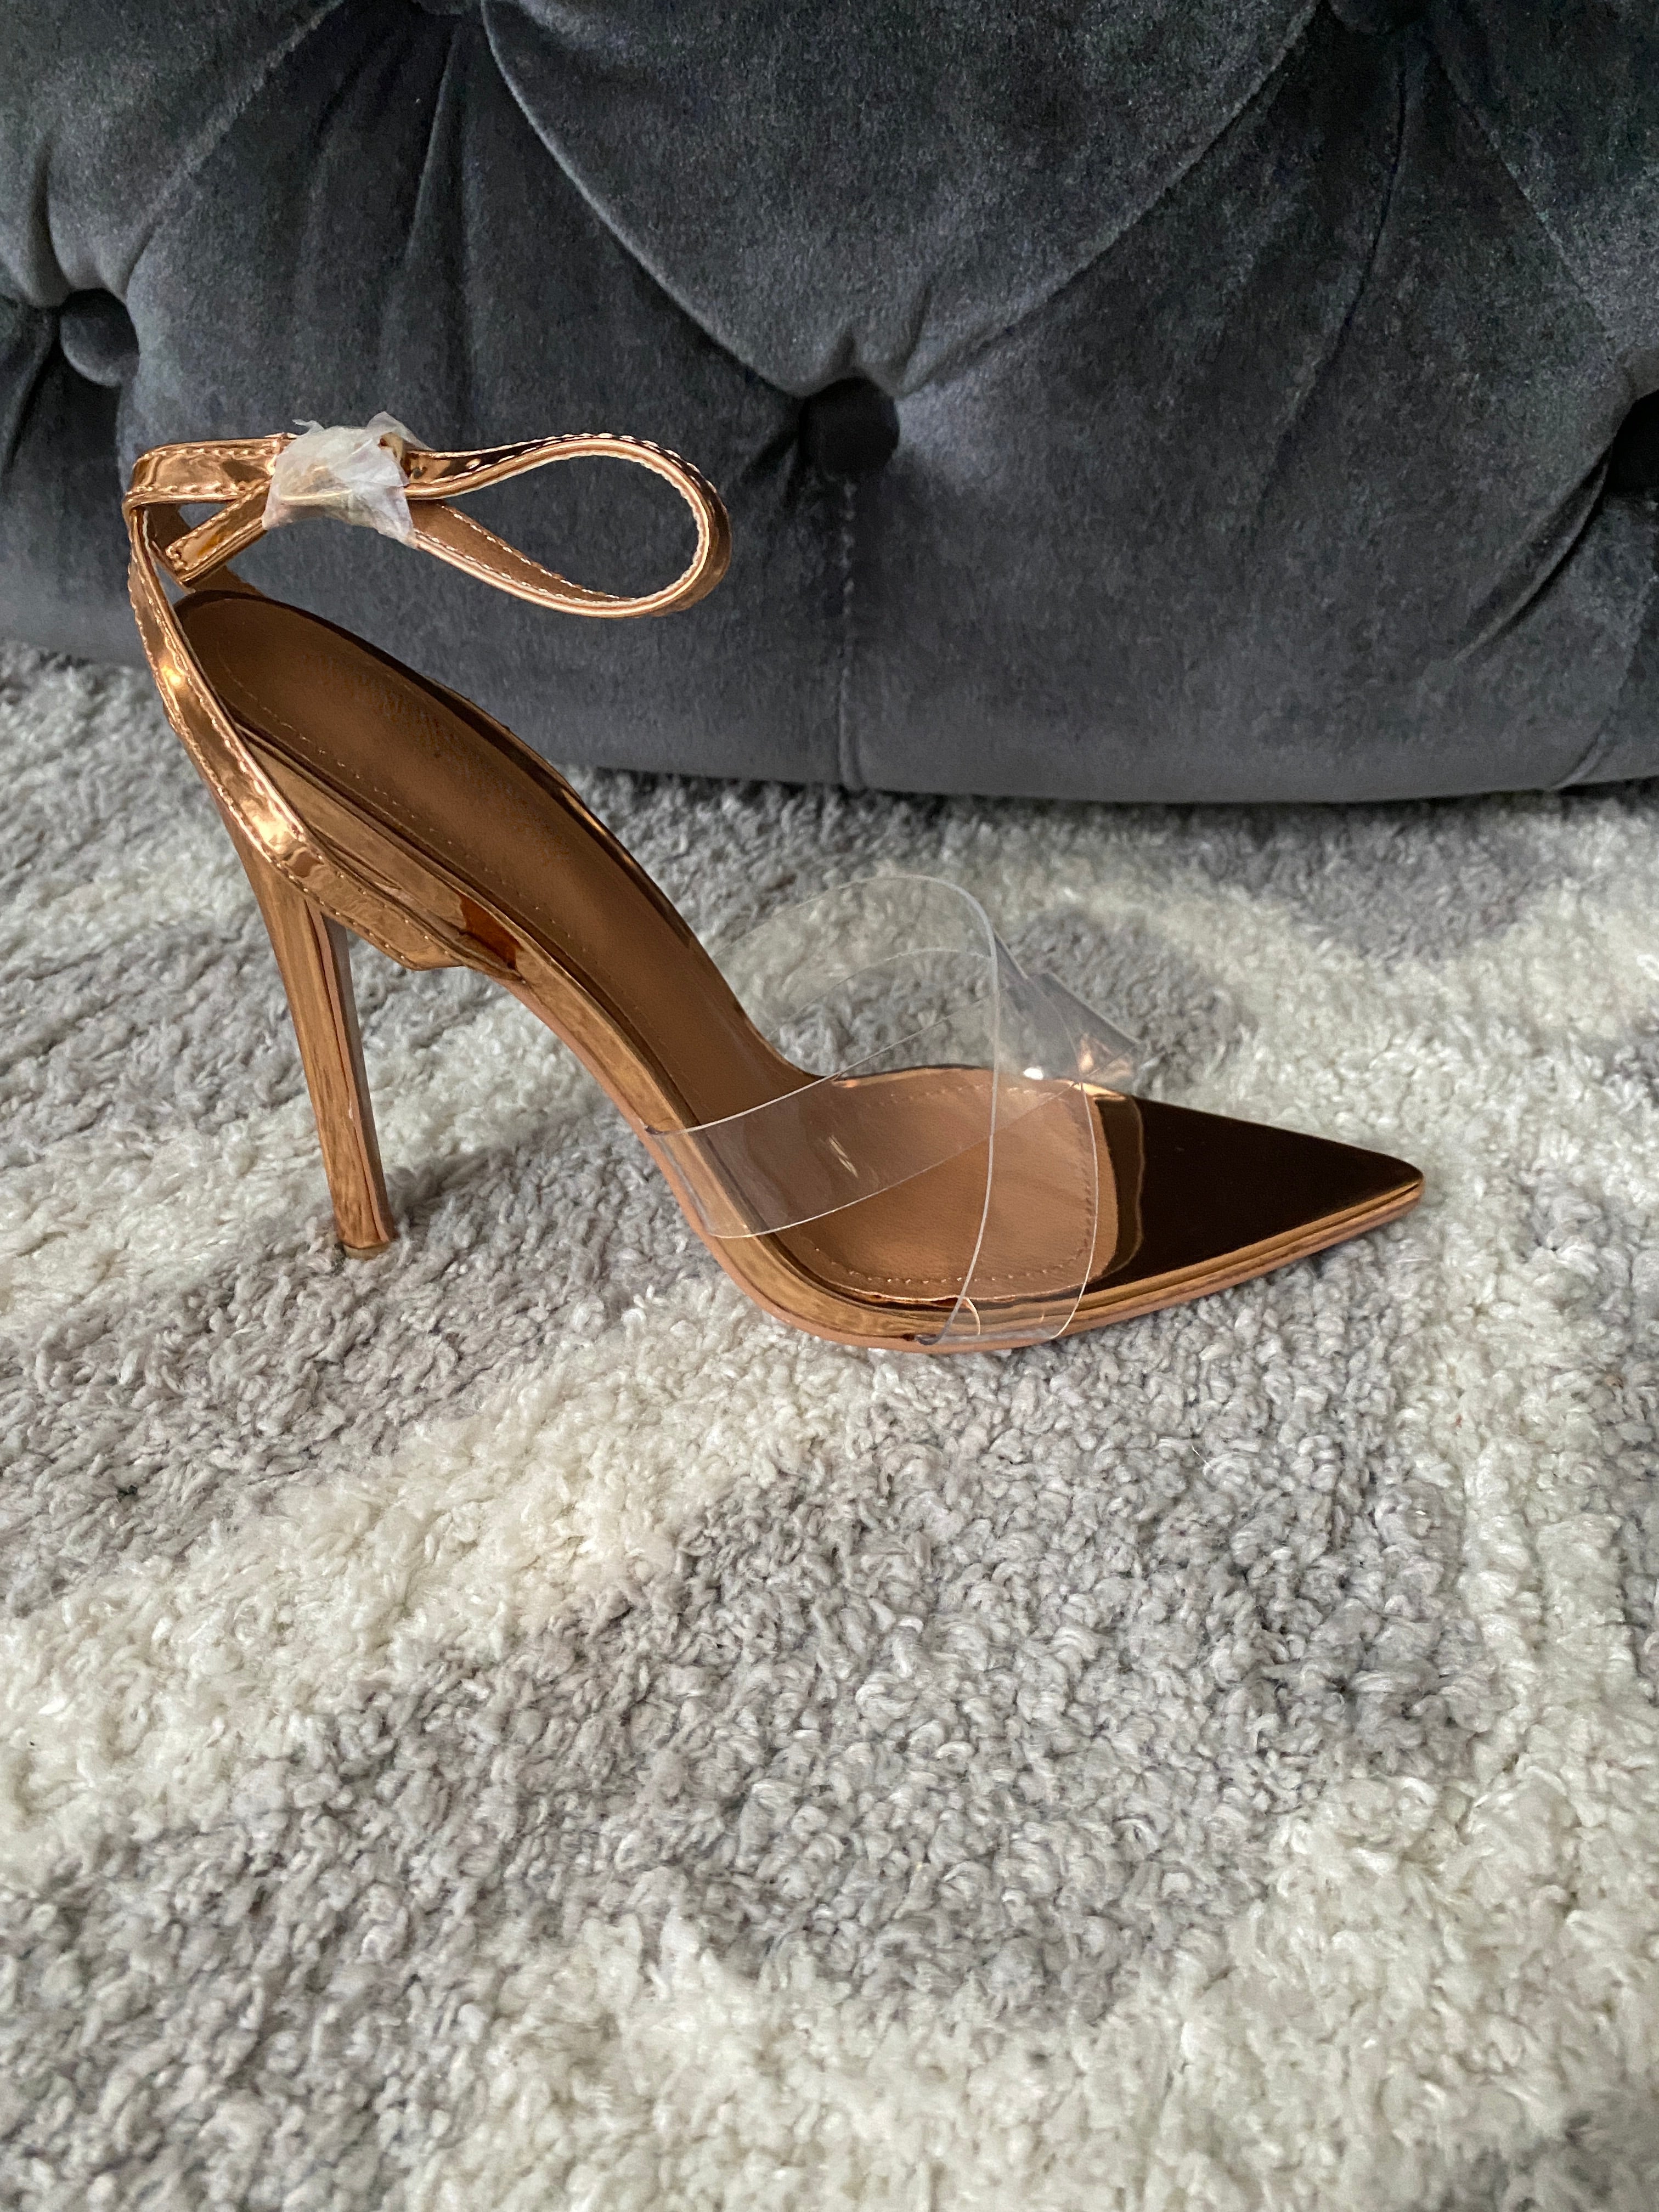 Gold Metallic Pointed Head Butterfly Back Stiletto High Heels Shoes